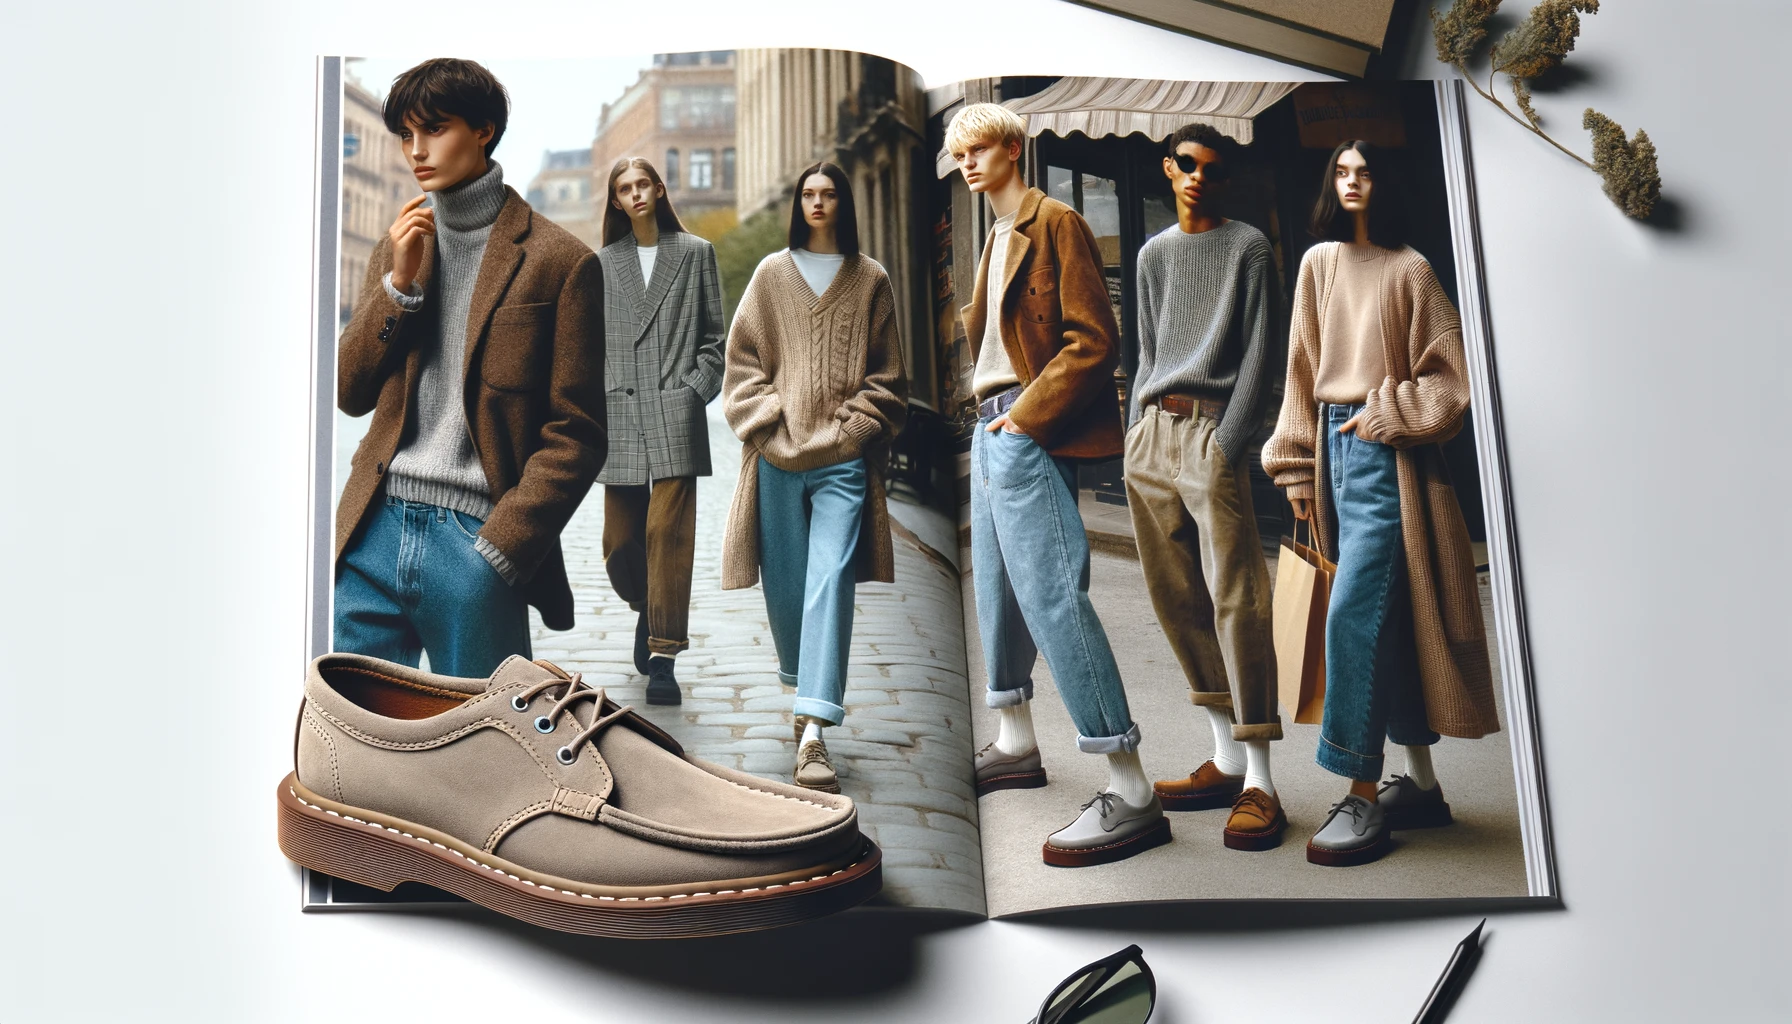 An inspirational fashion lookbook page featuring recommended outfits with Clarks Wallabees. Show models of different genders wearing stylish and trendy outfits paired with Clarks Wallabees, in a variety of settings like a city street, a cozy cafe, and a park. The image should capture a fashionable, youthful vibe, with 'Clarks' subtly displayed in a corner. The image should be horizontal with an aspect ratio of 16:9, focusing on the versatility and style of the shoes in everyday life.